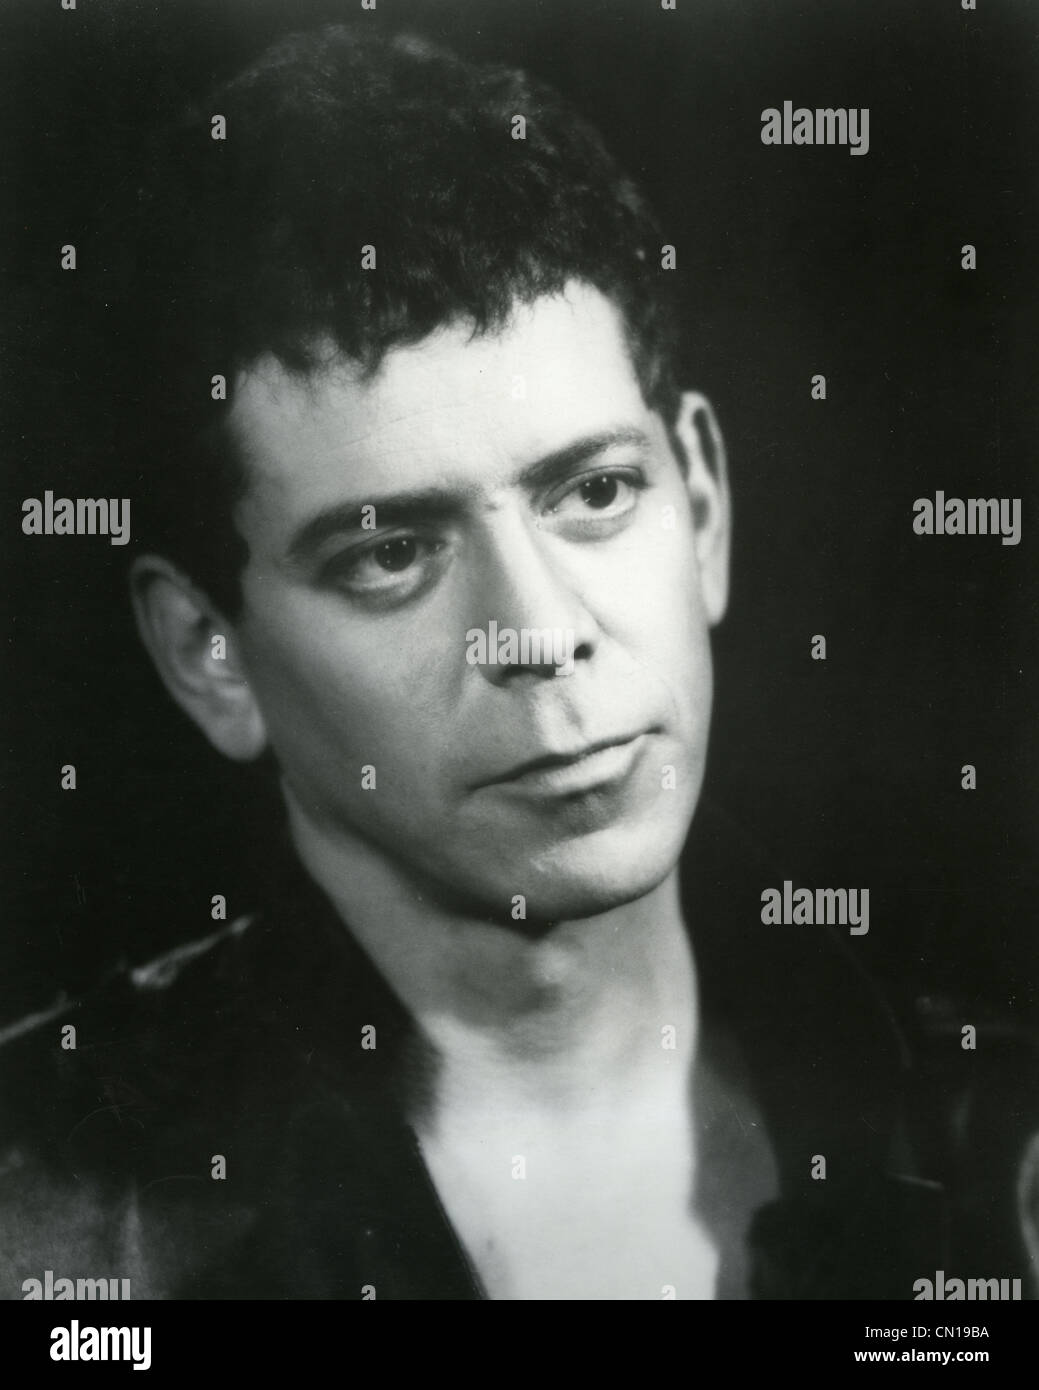 14: Lou Reed – Rock n Roll Animal (1974) / Live (1975), THE PRESS